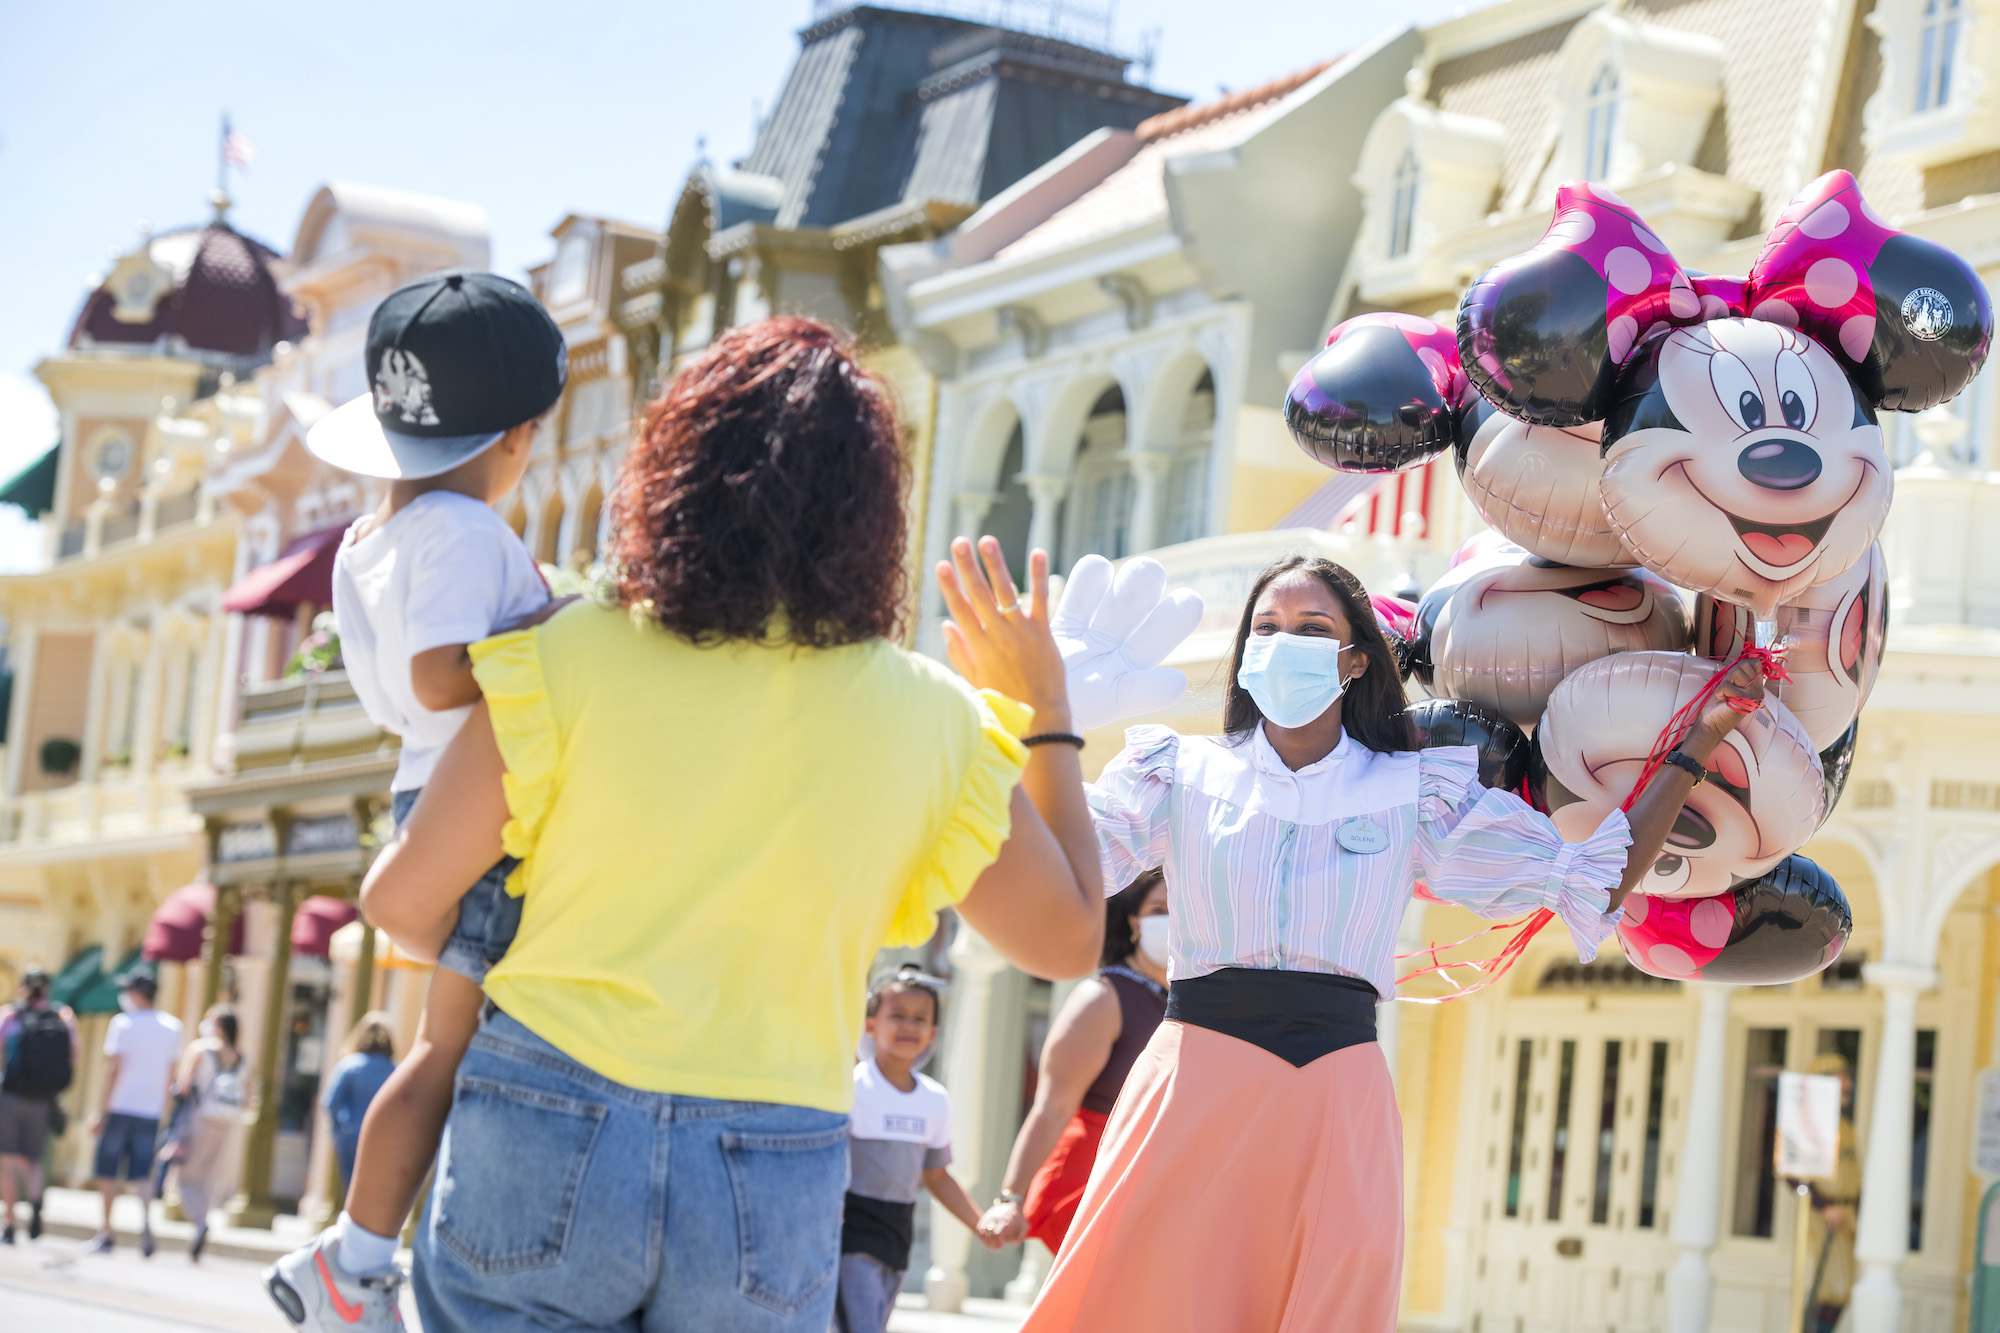 Disneyland Paris Accessibility Program Evolves, Putting Guest Own Autonomy Evaluation at the Forefront for Greater Access